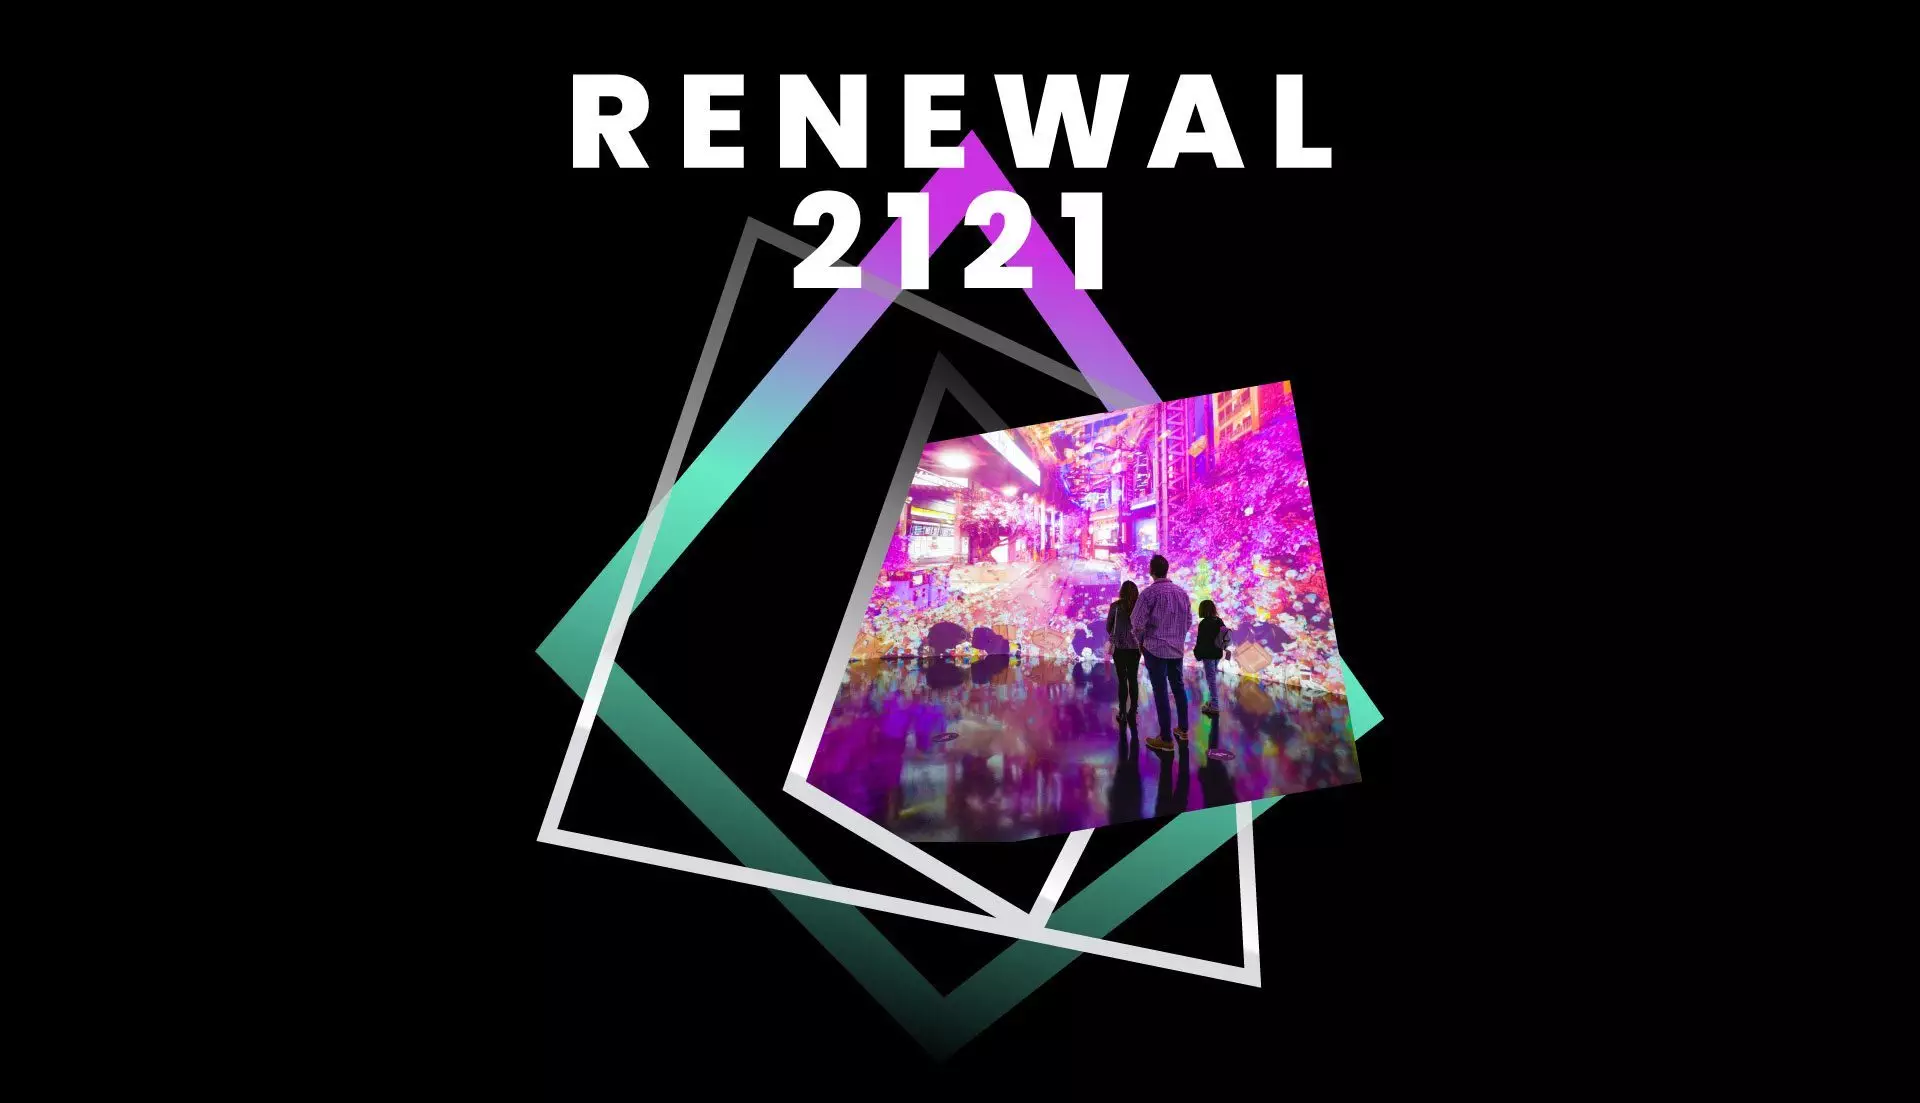 Renewal 2121 logo design with photograph of family looking at 270 degree projection art visuals